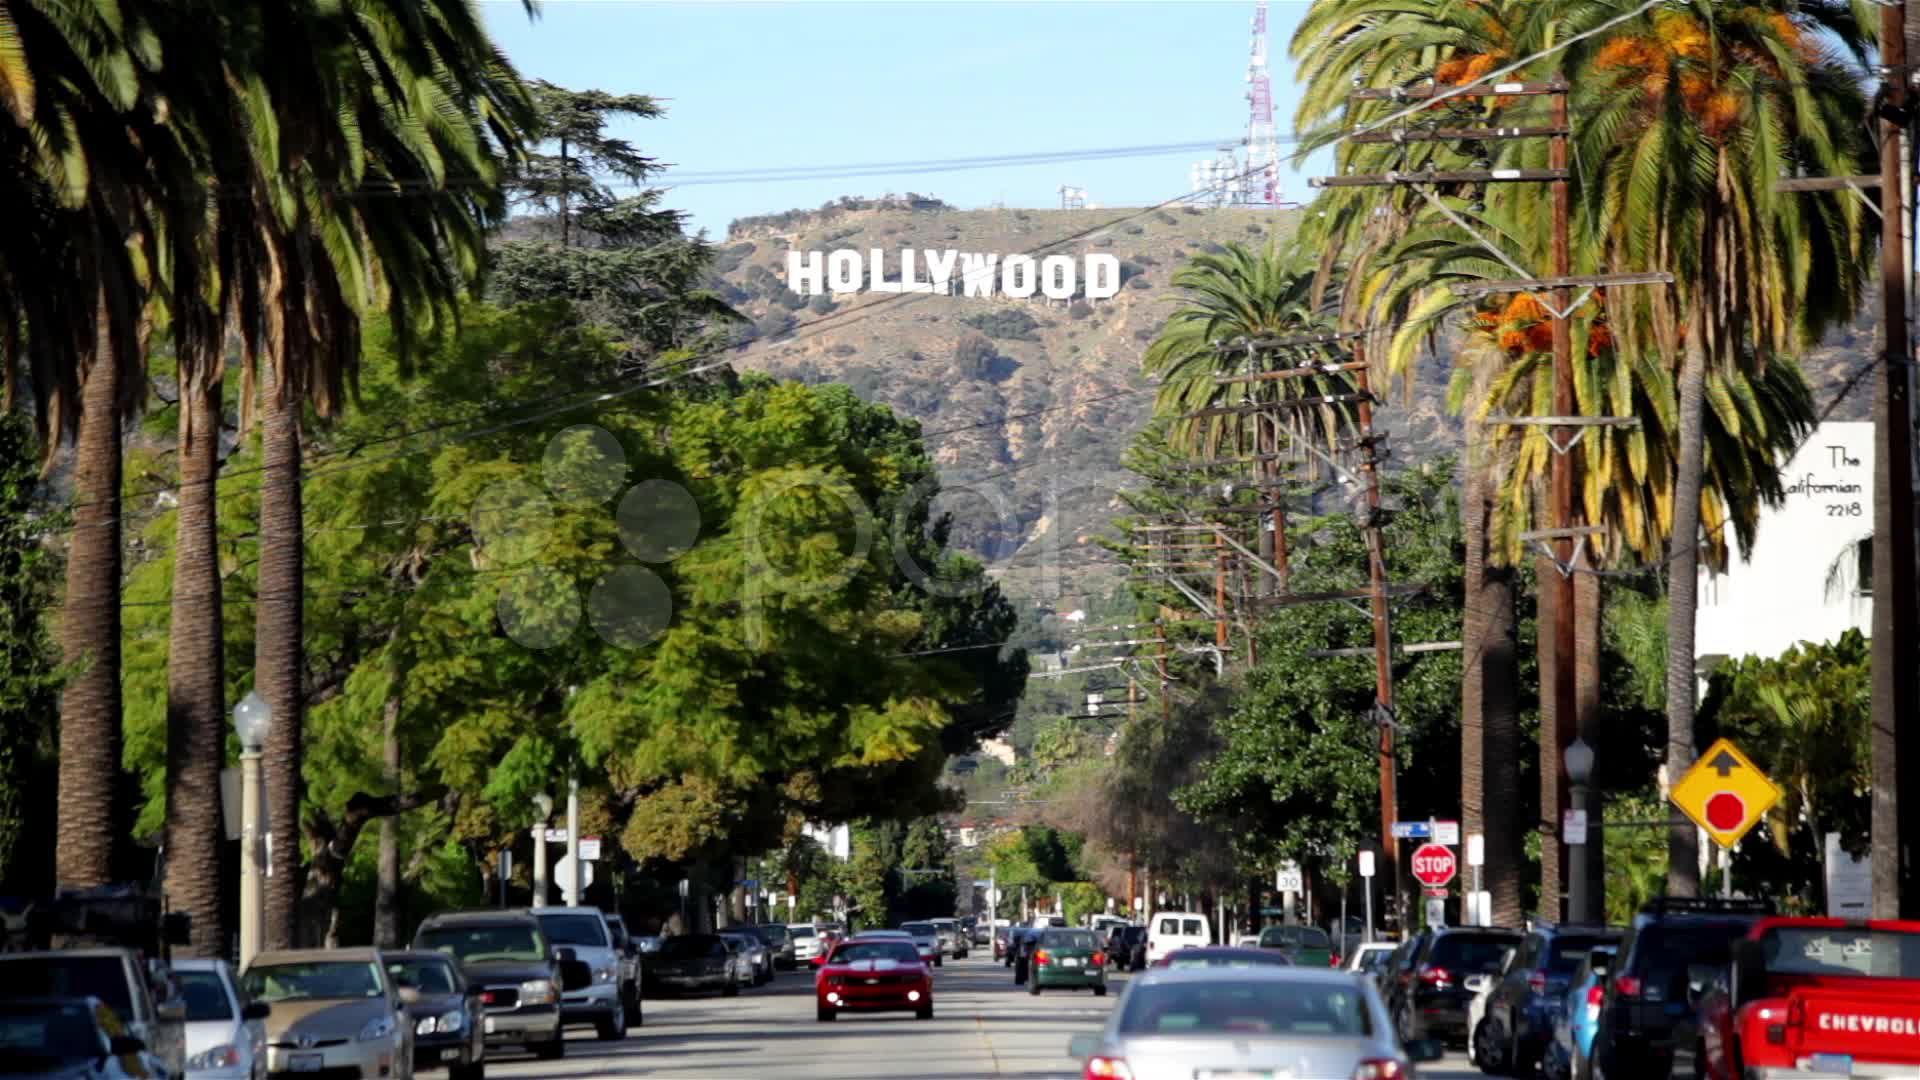 Hollywood Hills Wallpaper Free Hollywood Hills Background